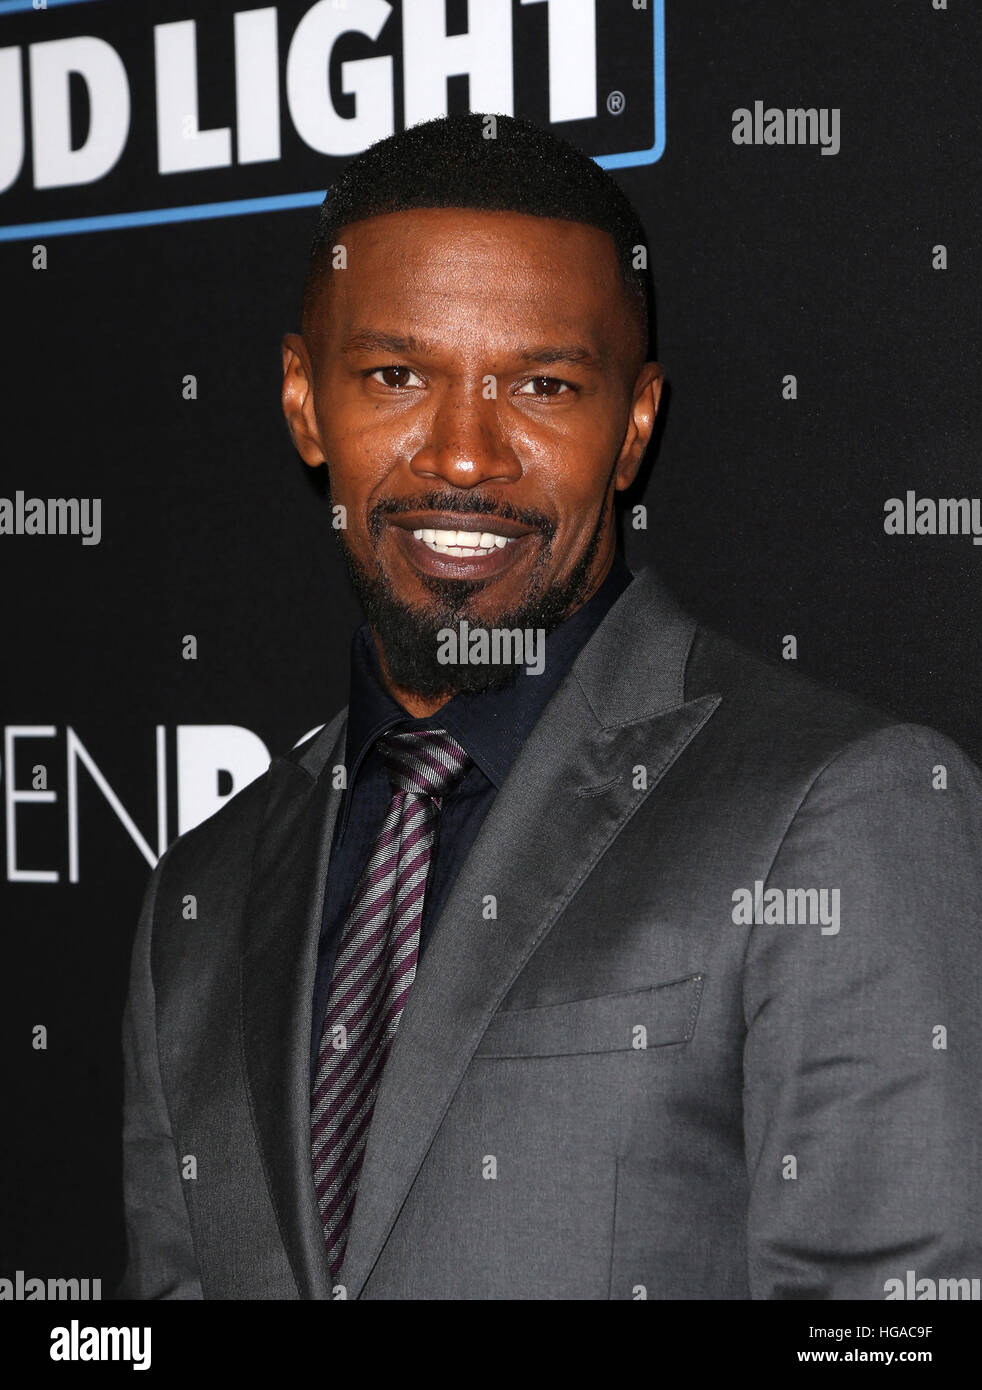 Los Angeles, CA, USA. 05th Jan, 2017. Jamie Foxx, At Premiere Of Open Road Films' 'Sleepless', At Regal LA Live Stadium 14 In California on January 05, 2017. © Faye Sadou/Media Punch/Alamy Live News Stock Photo